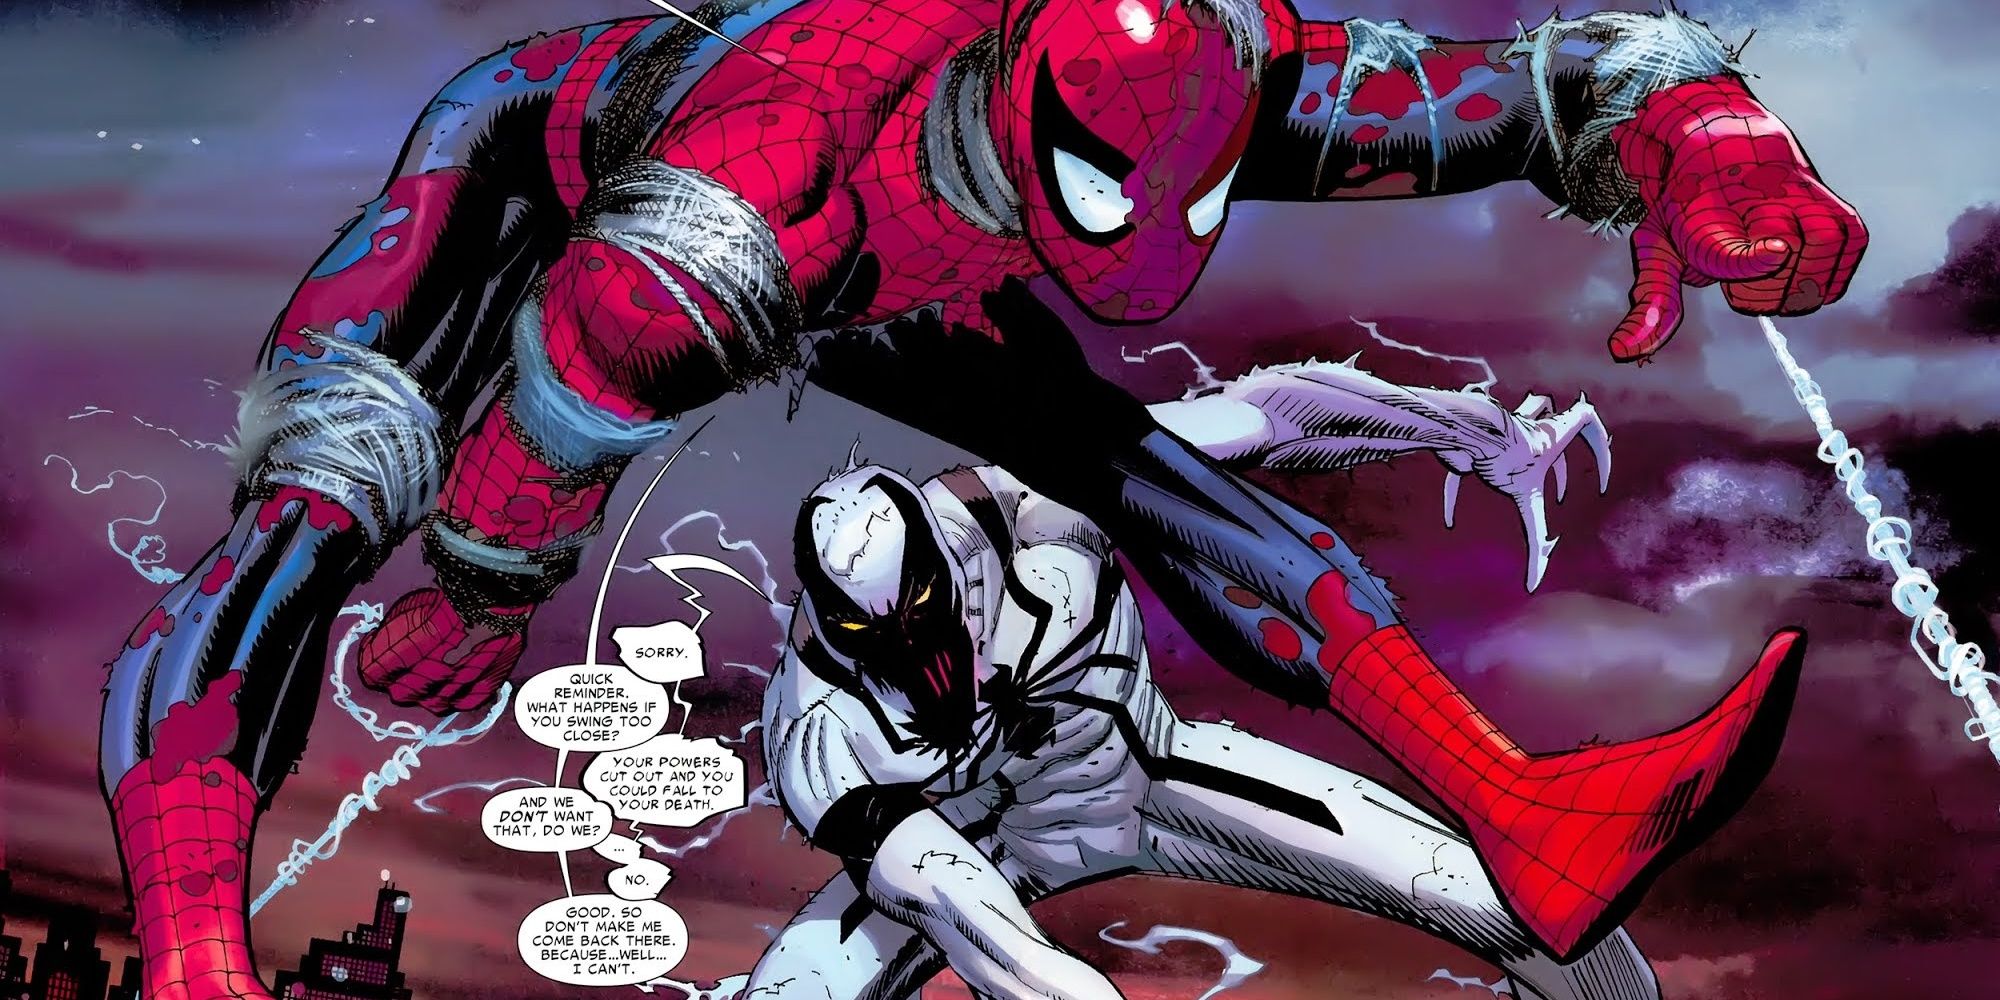 Spider-Man and Anti-Venom swinging in the air with webs in a comic book